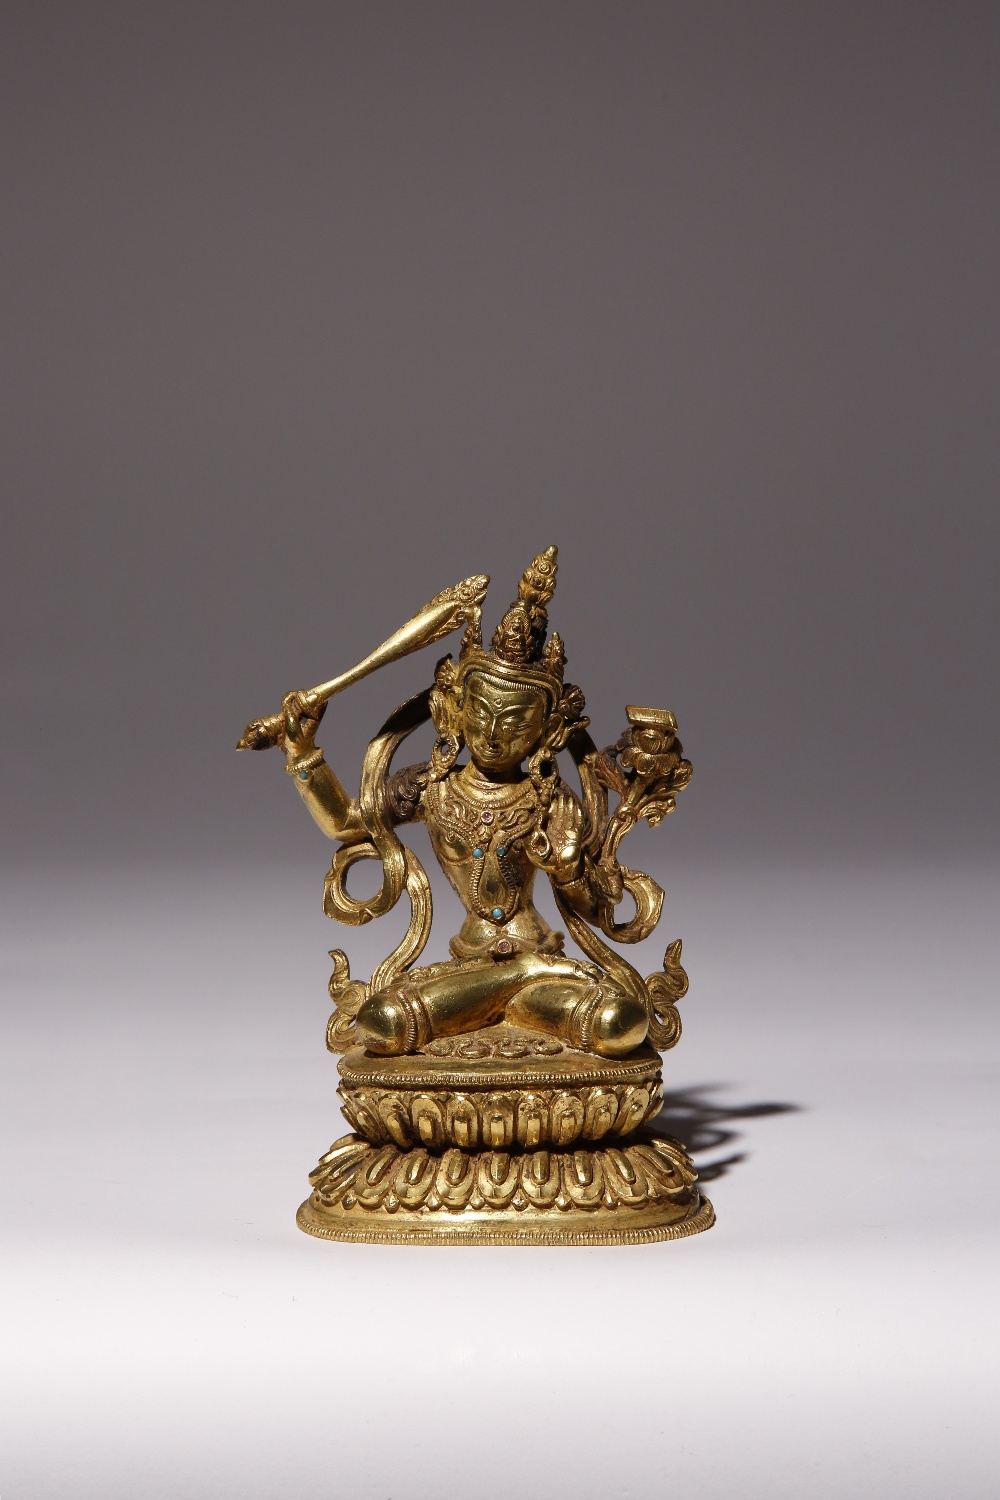 A TIBETAN GILT-BRONZE FIGURE OF MANJUSRI 15TH/16TH CENTURY Seated in dhyanasana upon a double